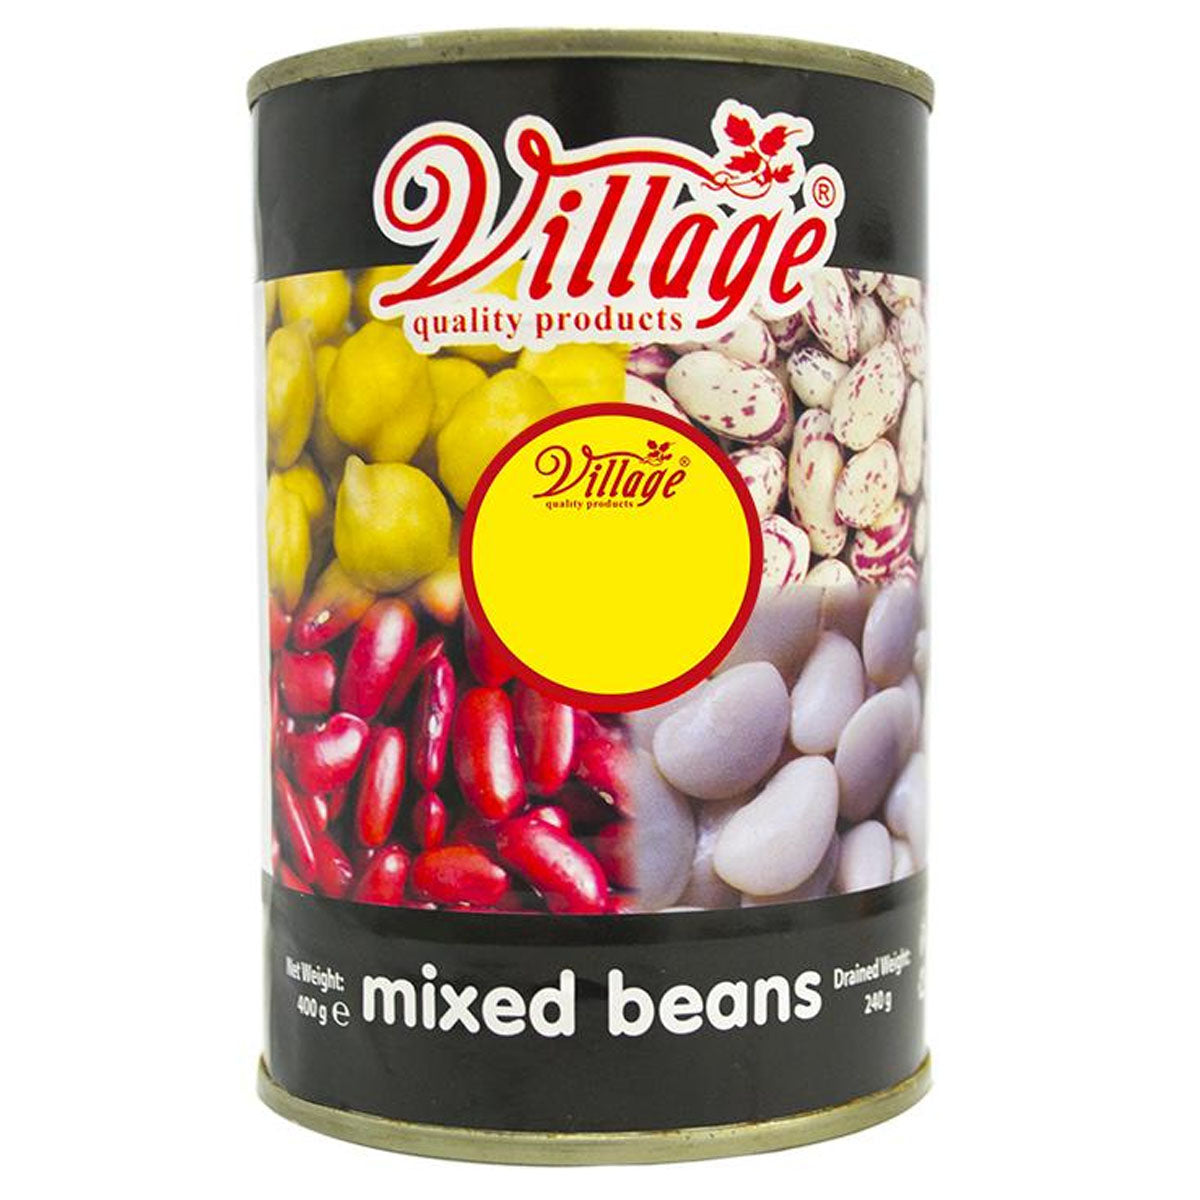 Village - 4 Mixed Beans - 400g - Continental Food Store